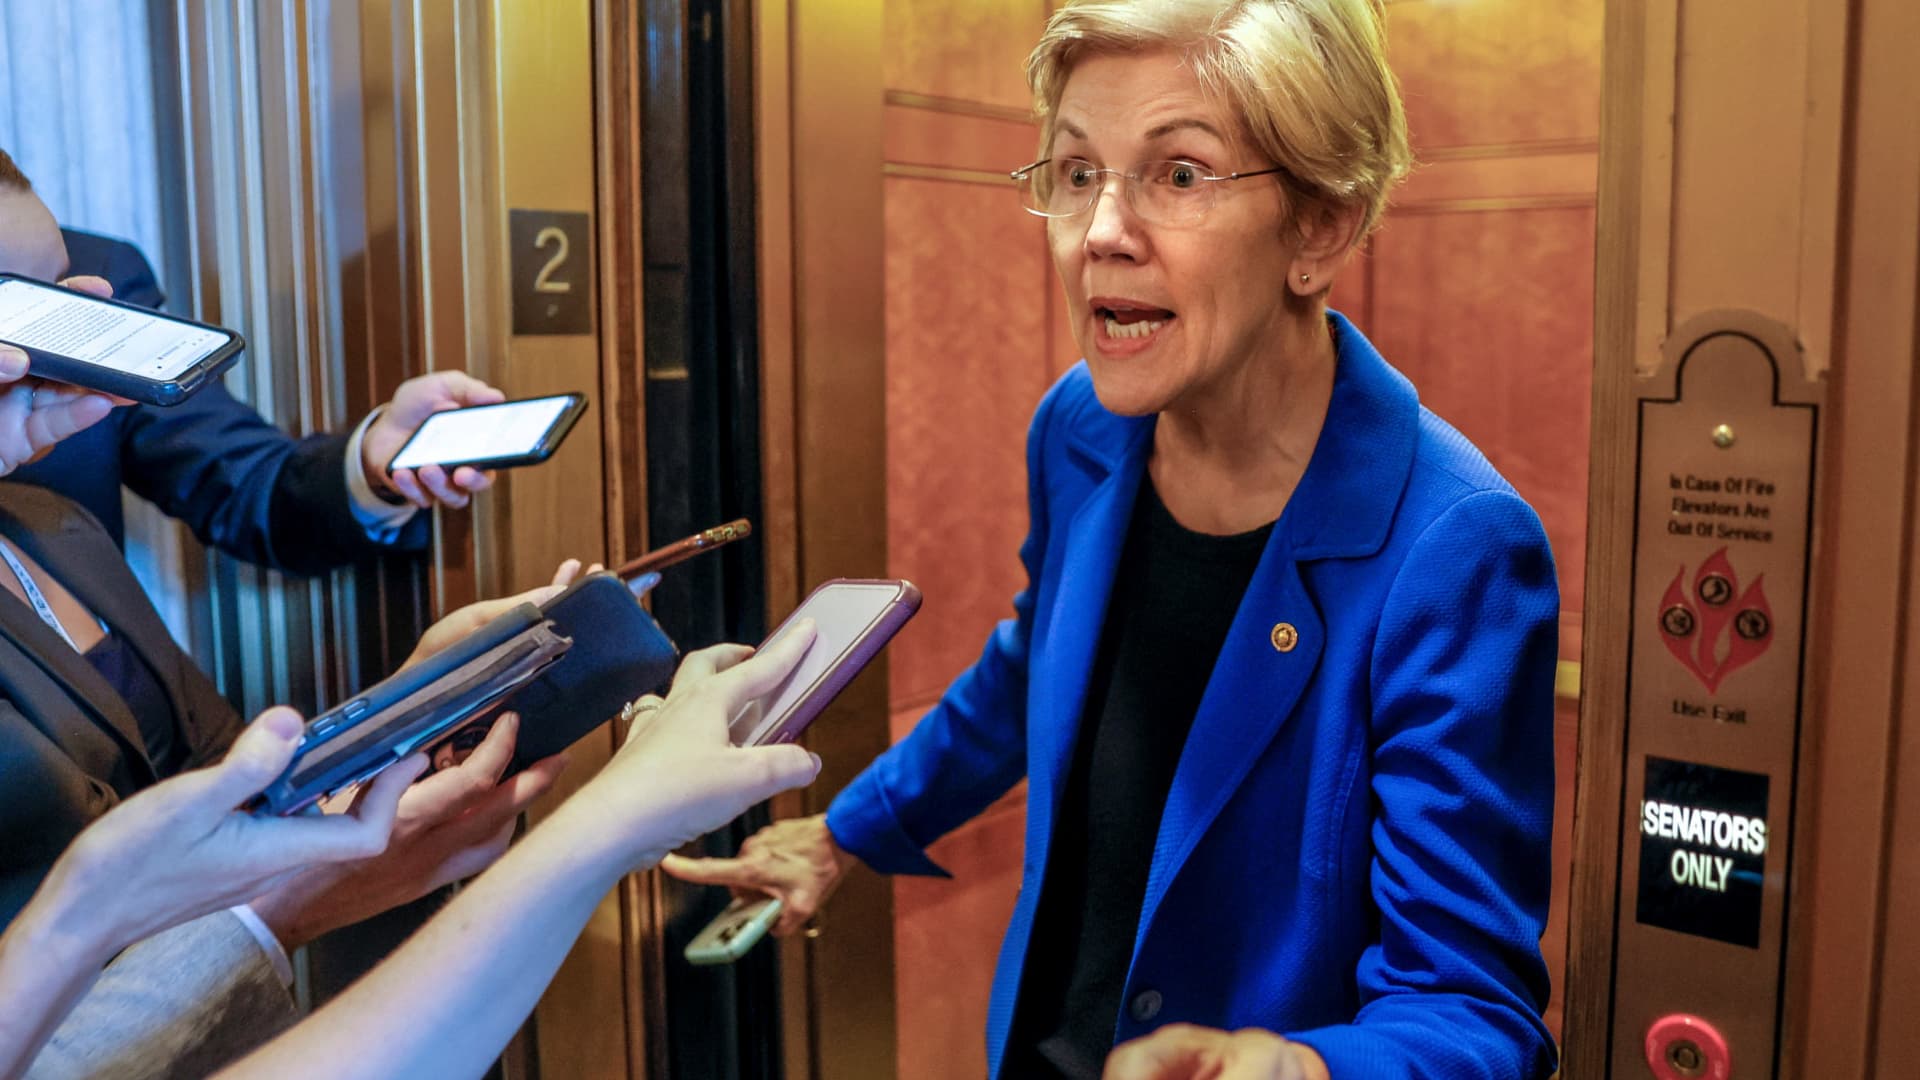 Warren unveils bill to repeal Trump-era bank deregulation she says led to SVB, Signature collapses